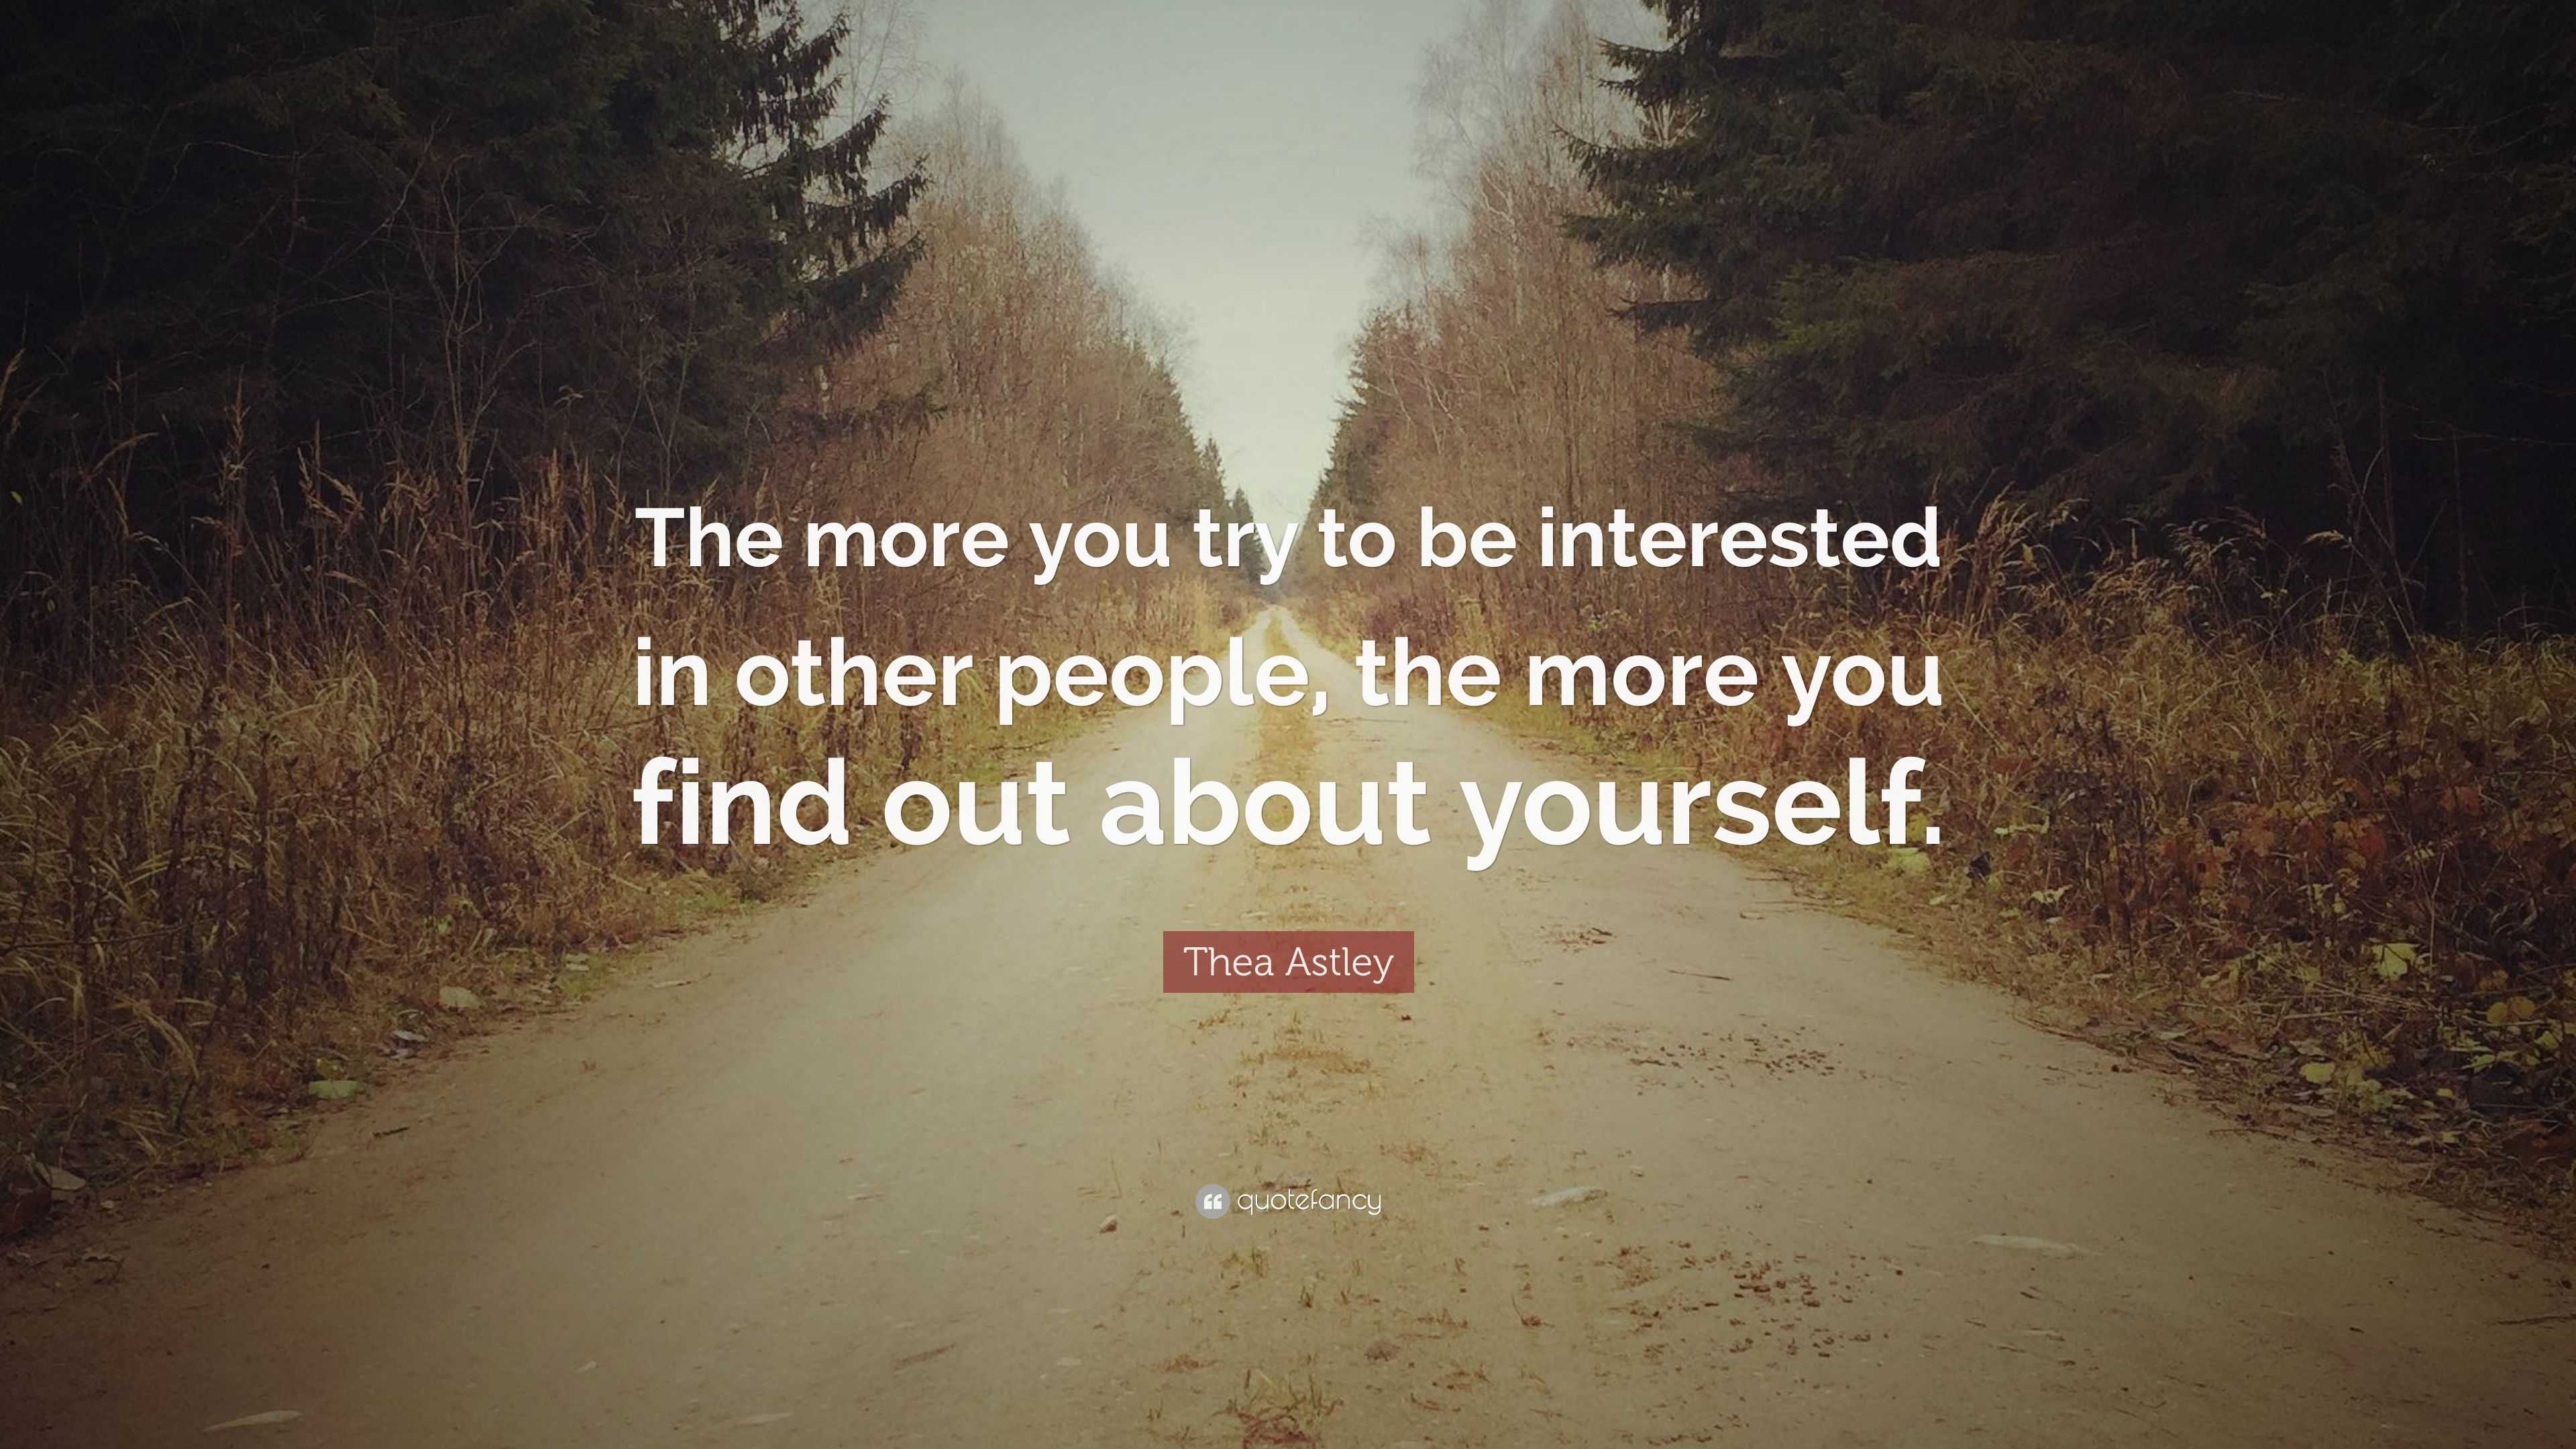 Thea Astley Quote: “The more you try to be interested in other people ...